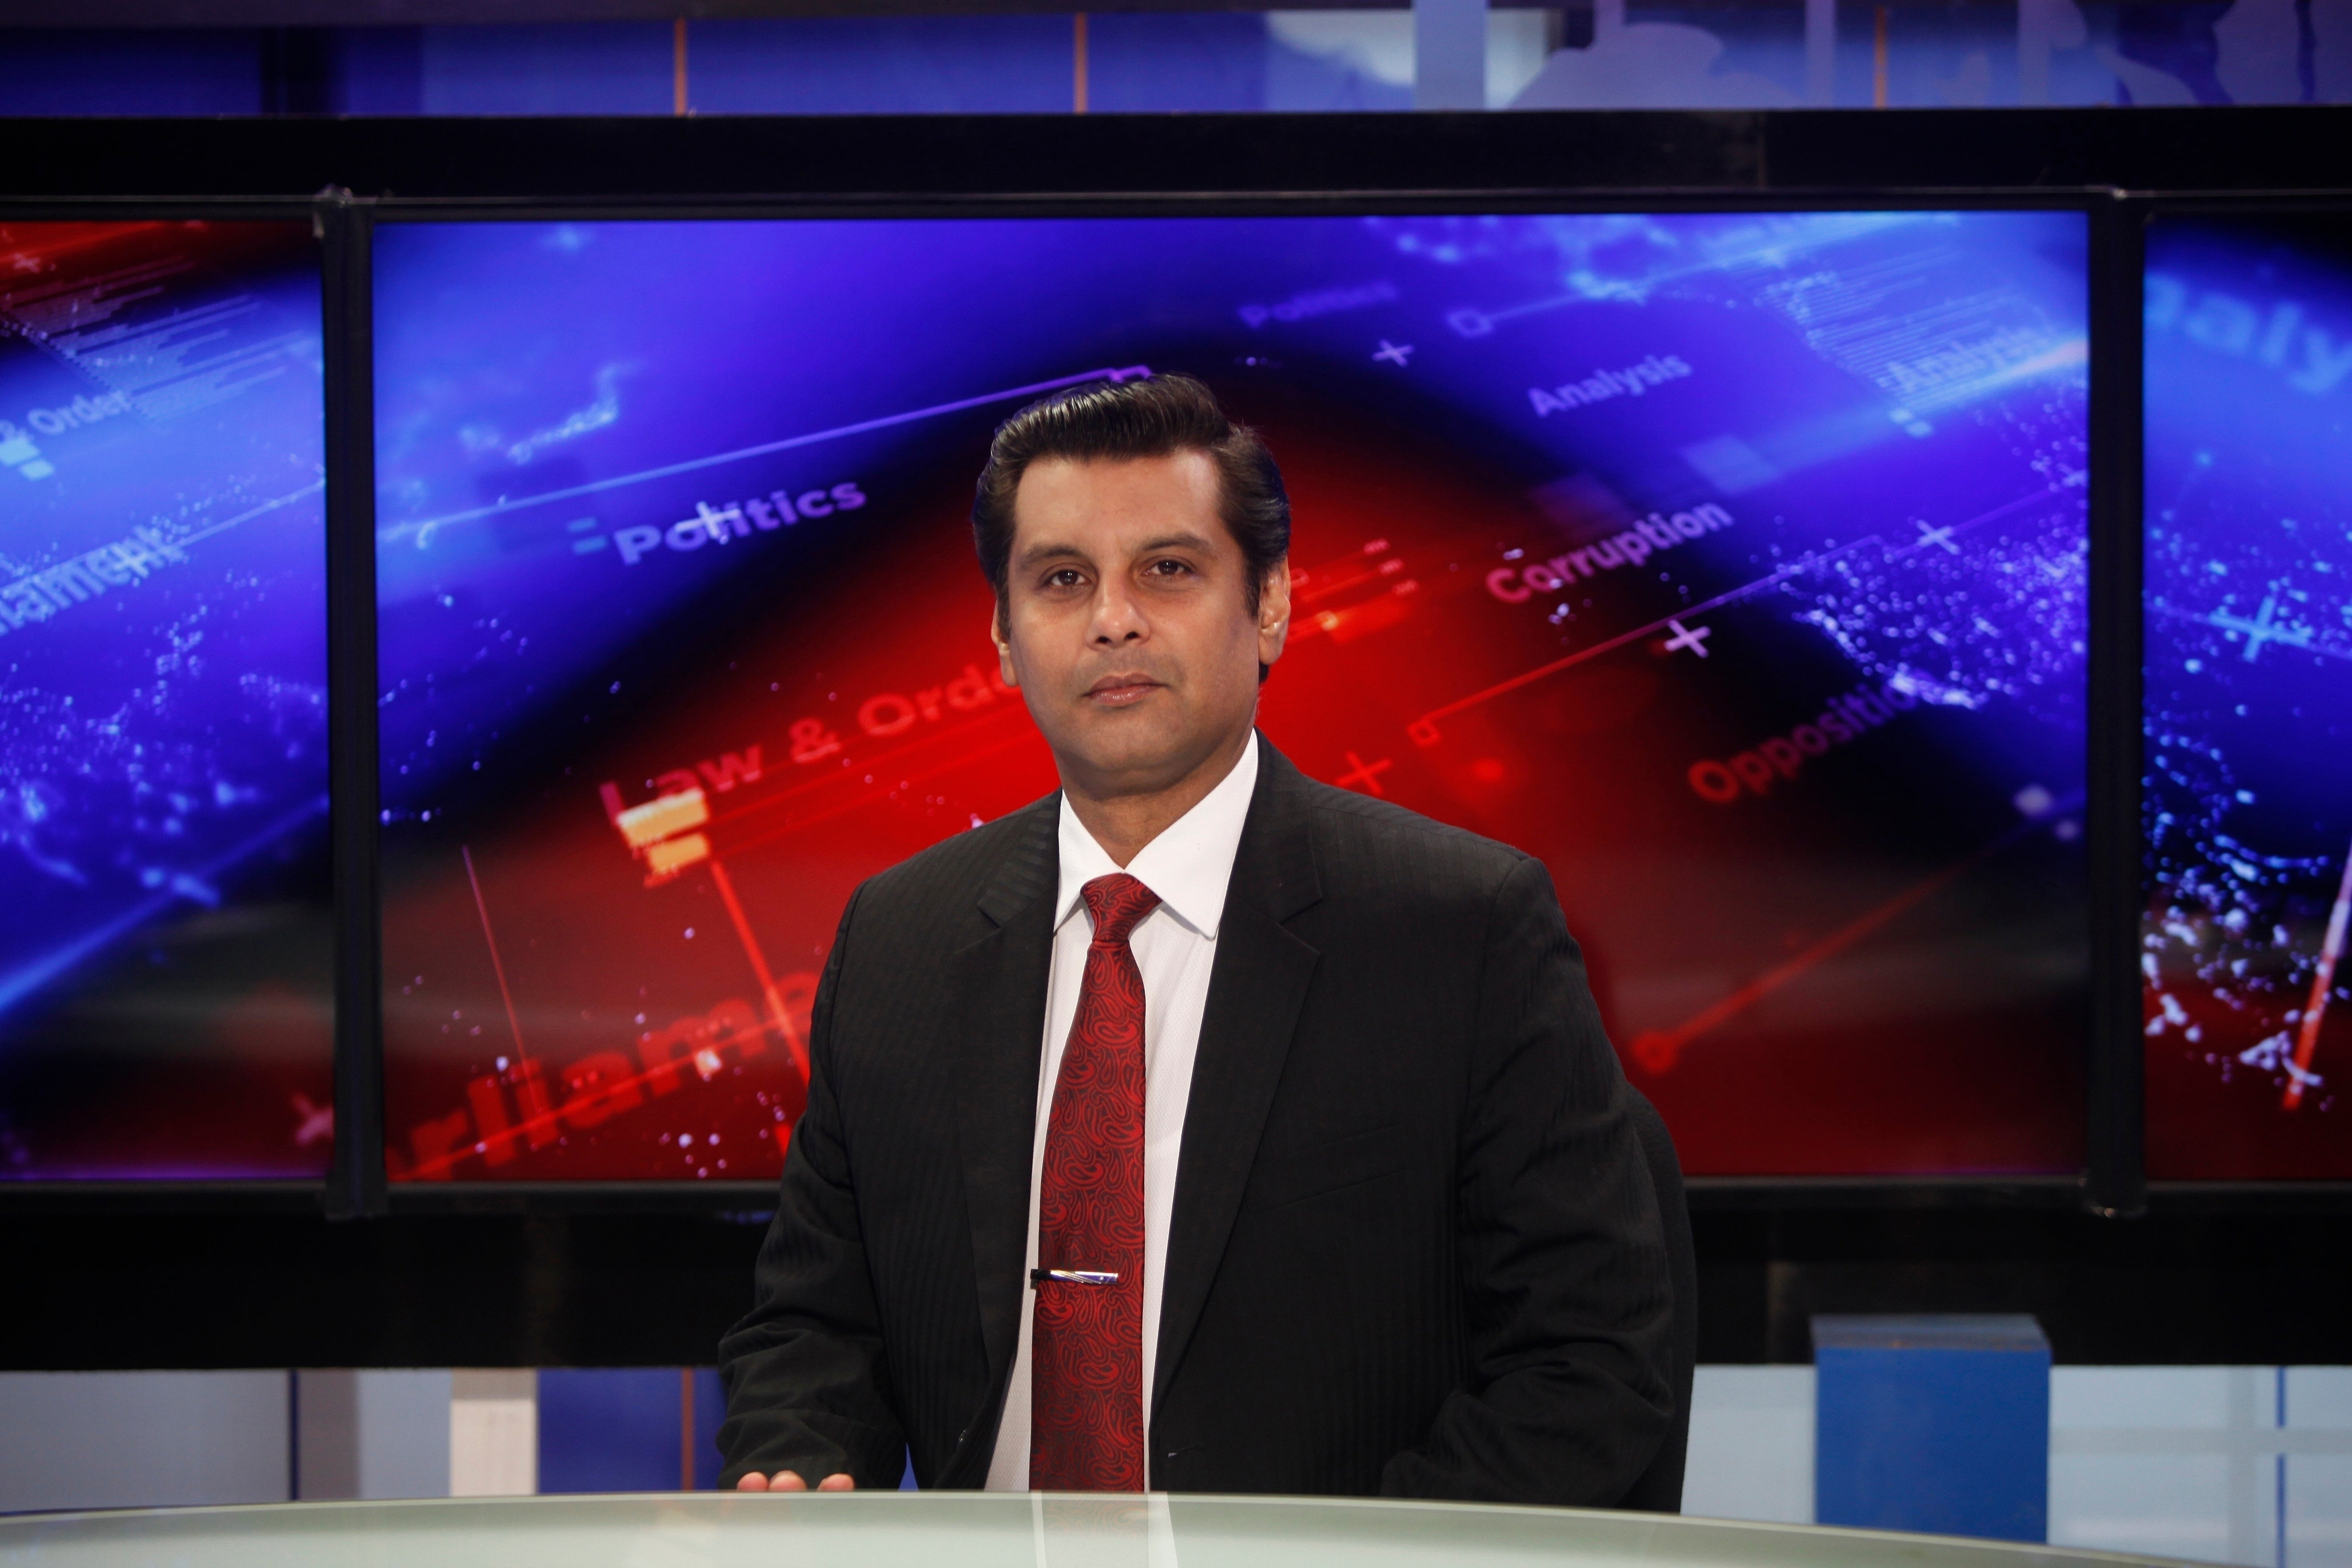 Senior Pakistani journalist Arshad Sharif poses for a photograph prior to recording an episode of his talk show at a studio in Islamabad, Pakistan